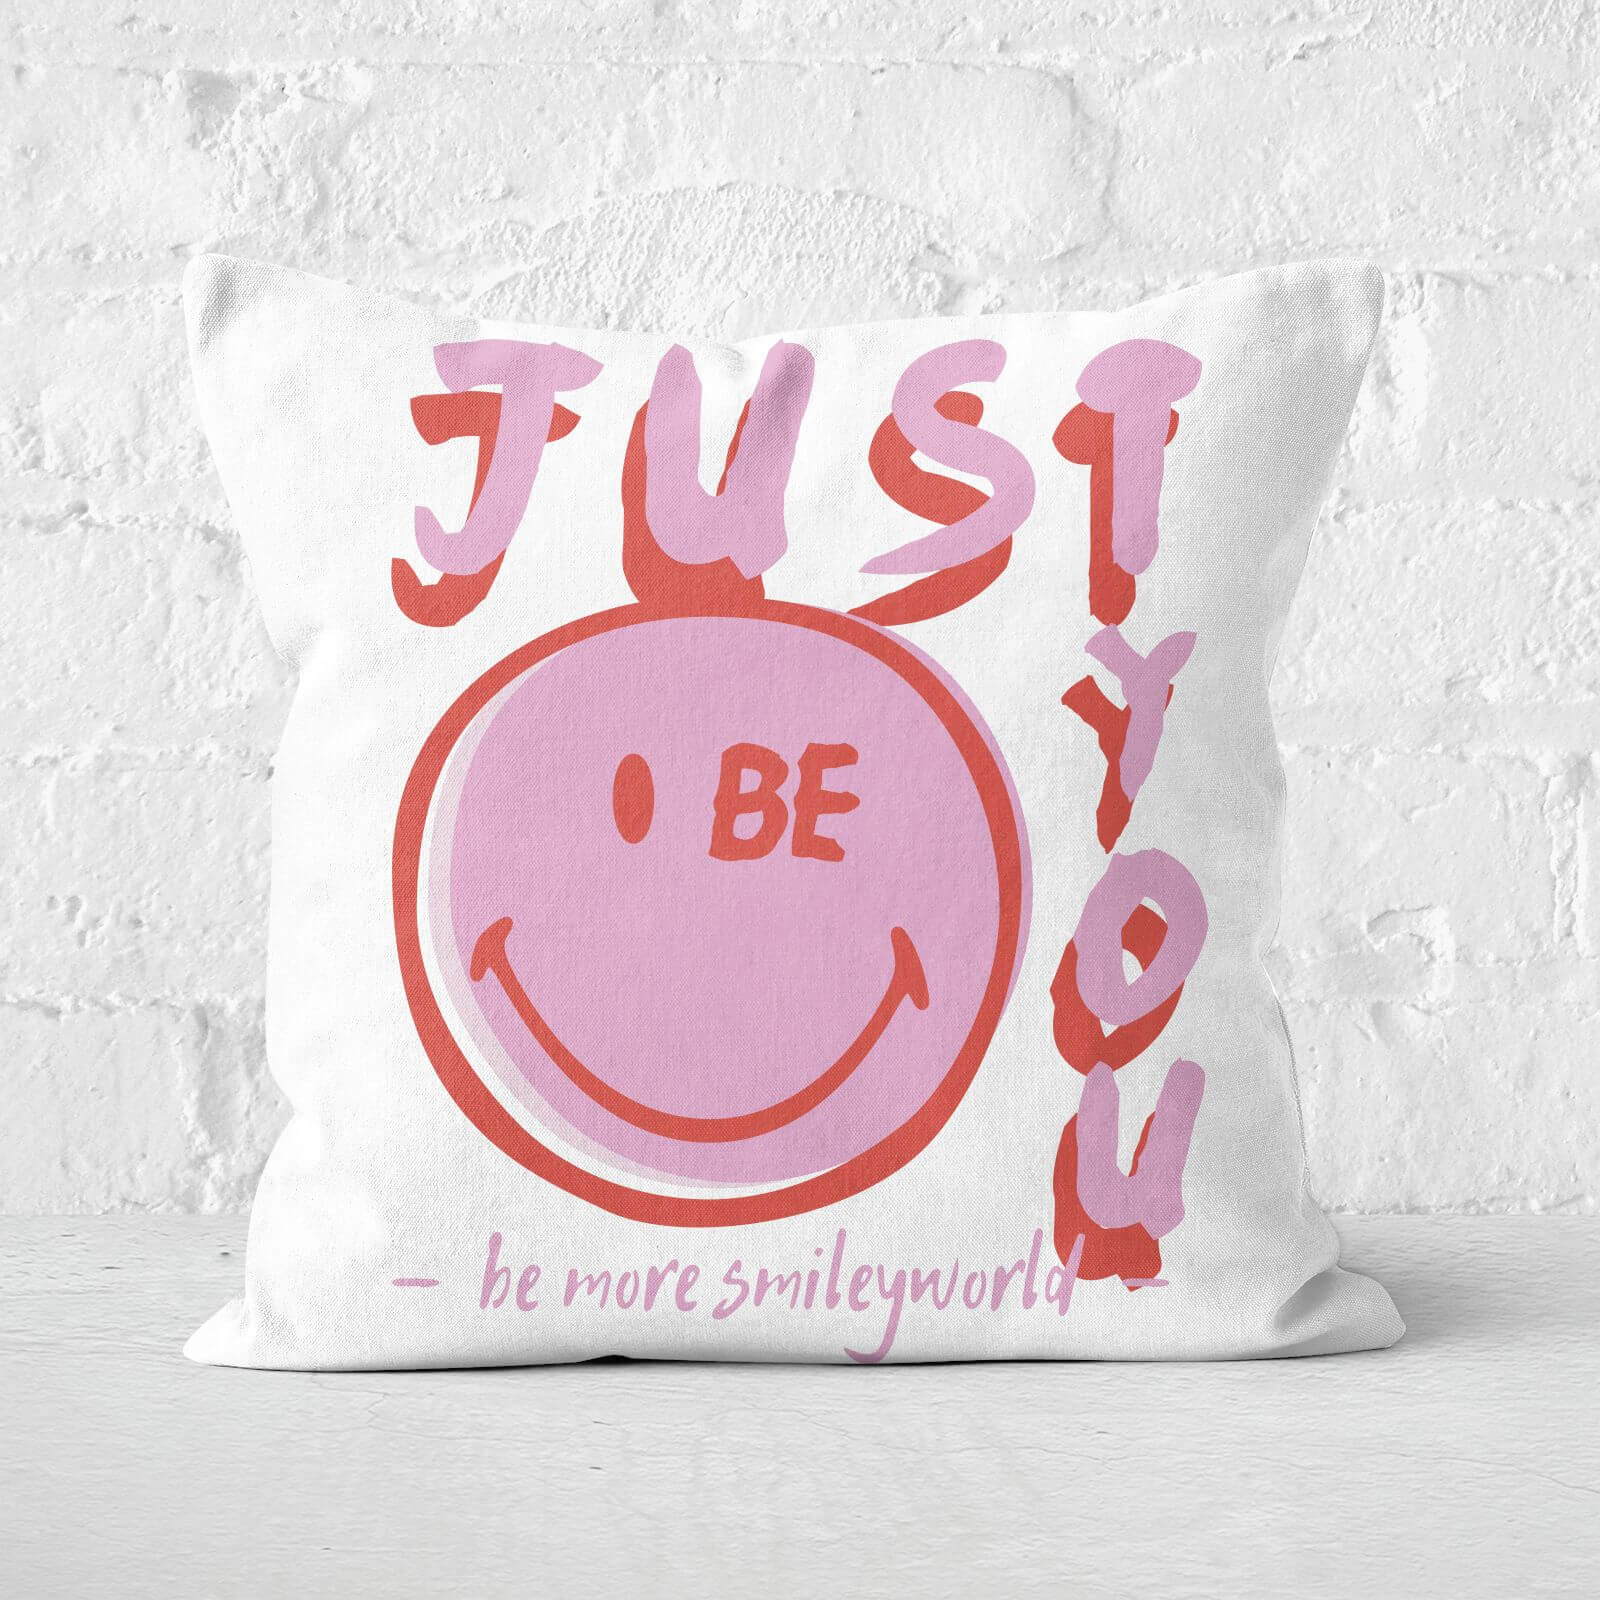 Just Be You Cushion Square Cushion - 60x60cm - Soft Touch